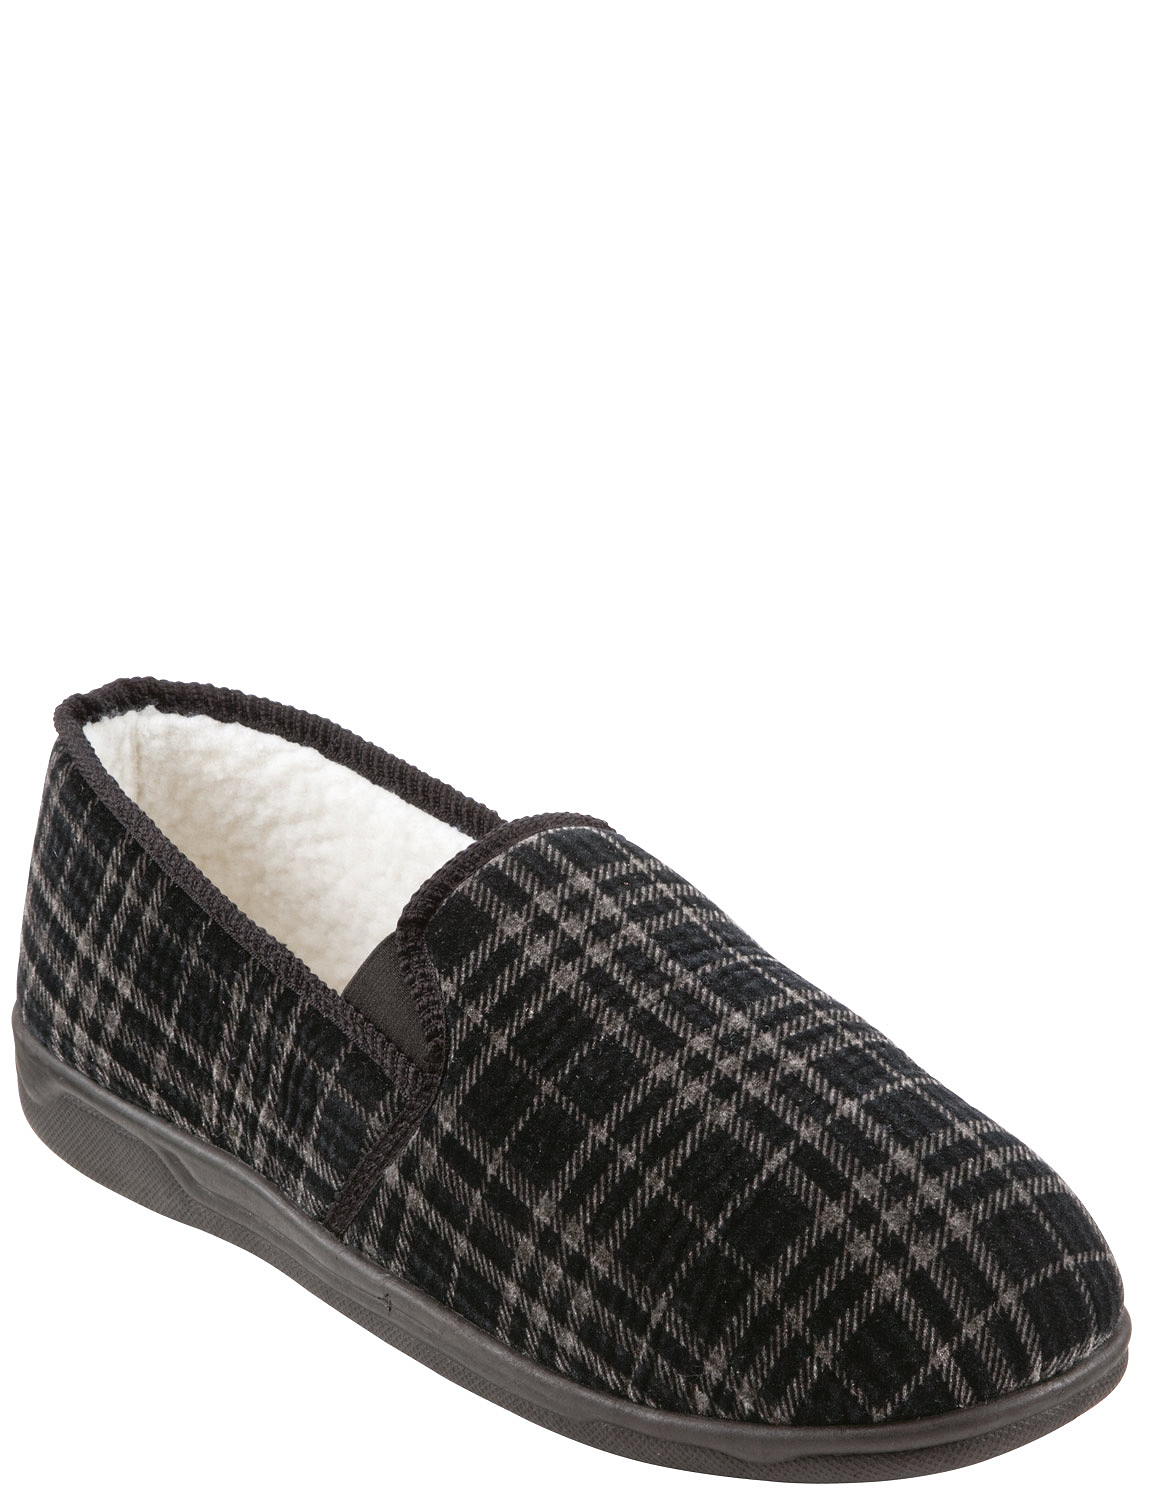 Thermal Lined Slipper With Outdoor Sole | Chums